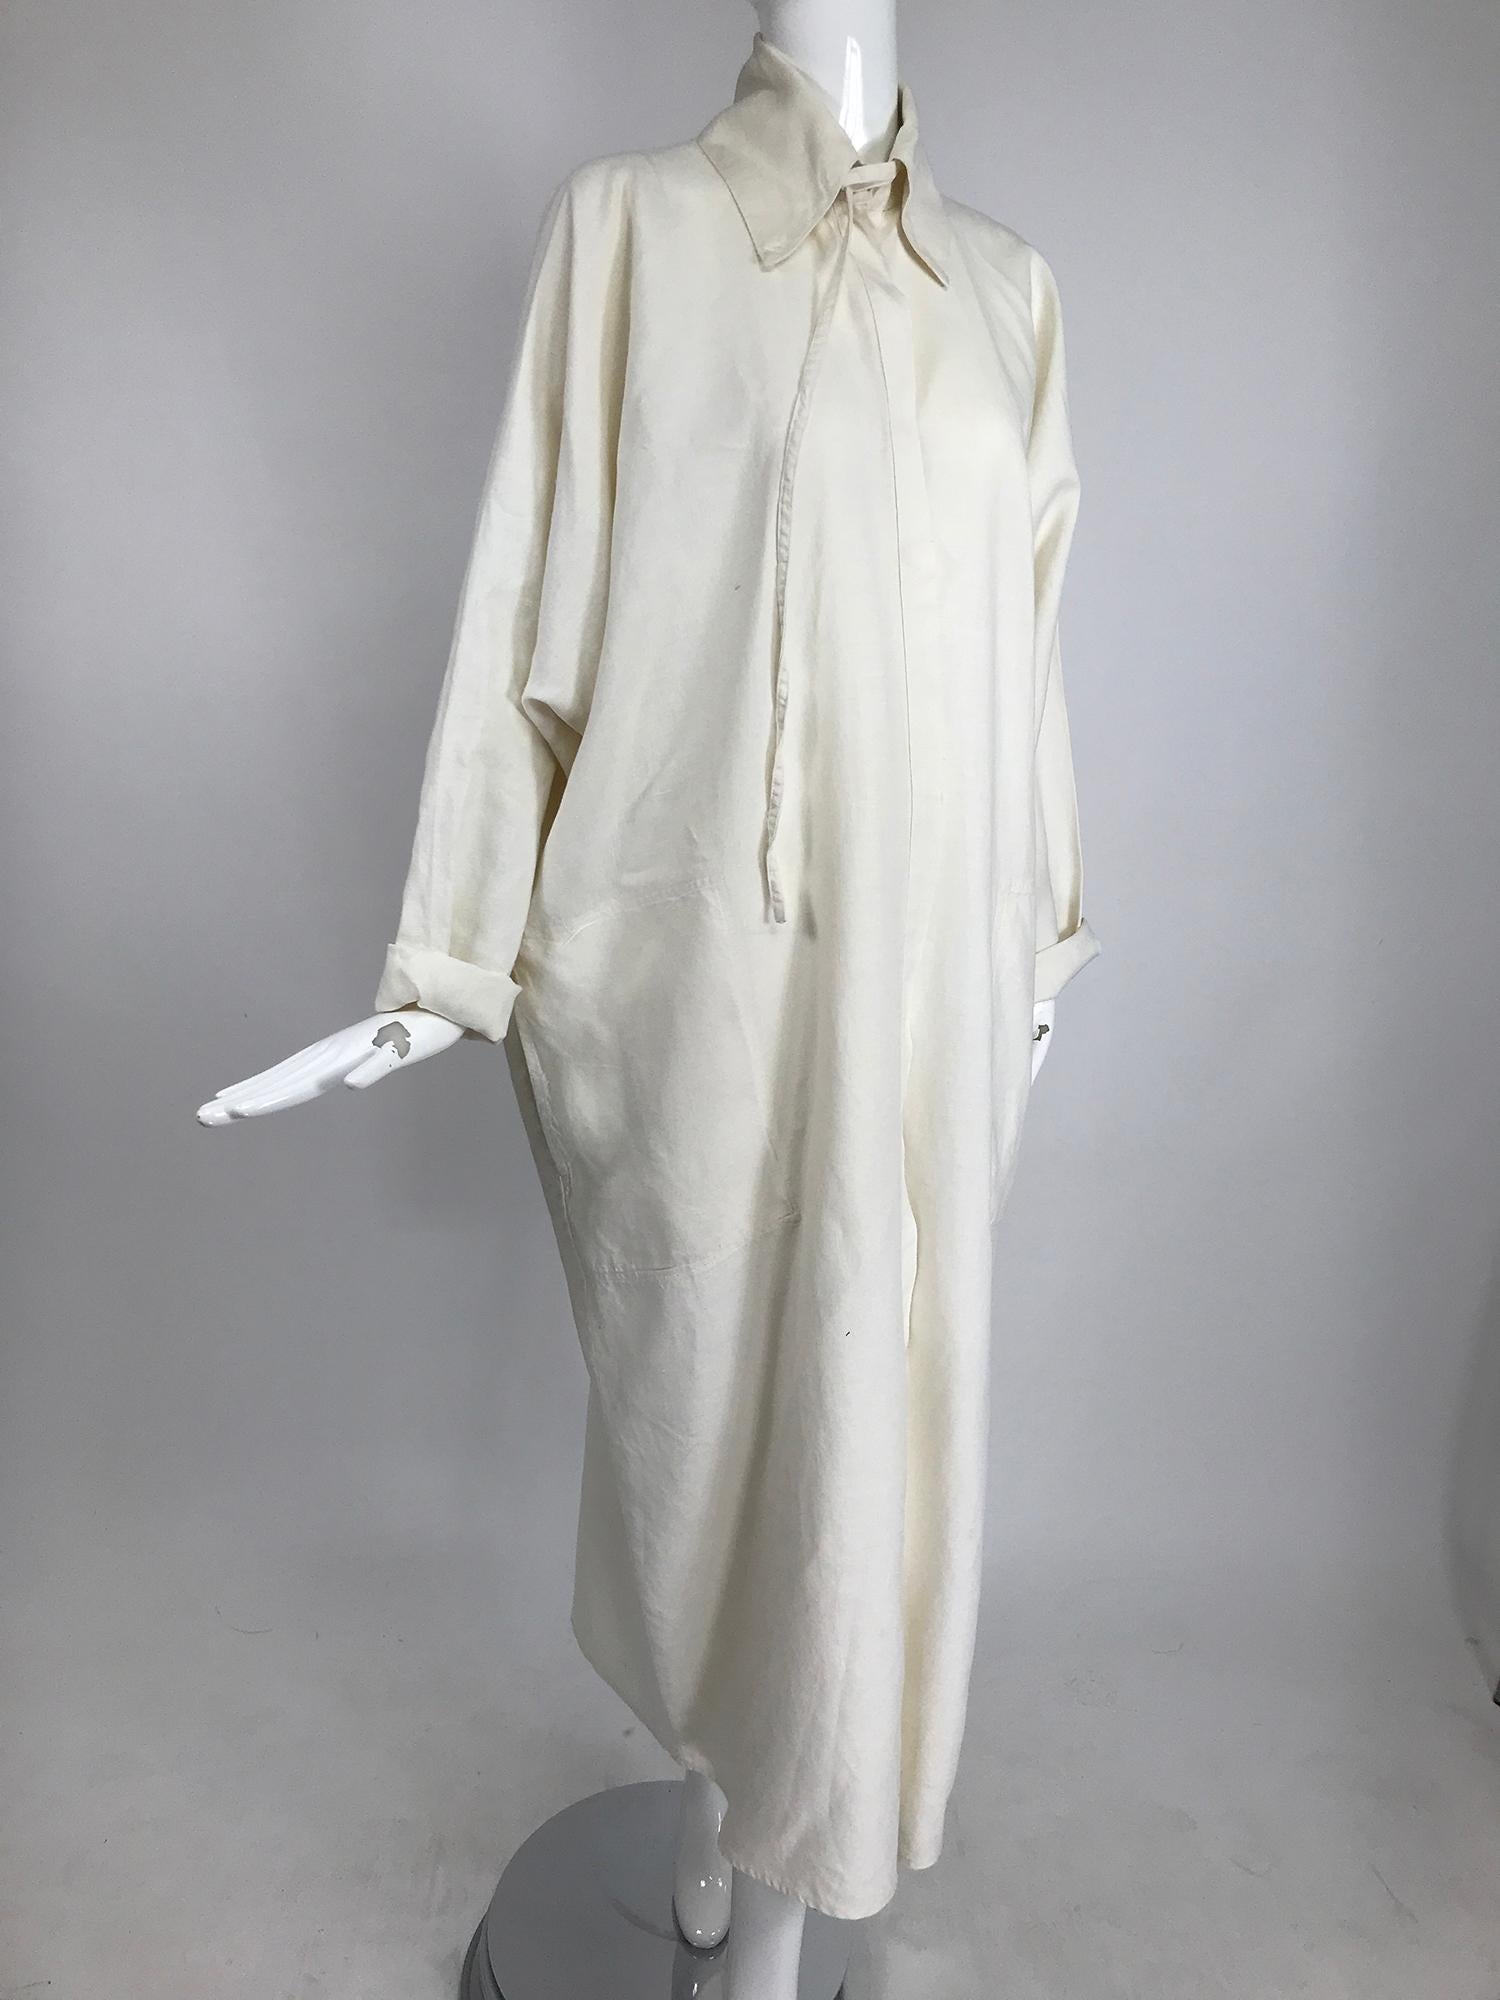 Vintage white (ivory) linen duster, coat, it's oversized as was the style in the 1990s. Beautiful quality linen coat with a very unique closure at the neck see photo. Wing collar coat has bat wing sleeves and turn back cuffs. The coat is open at the